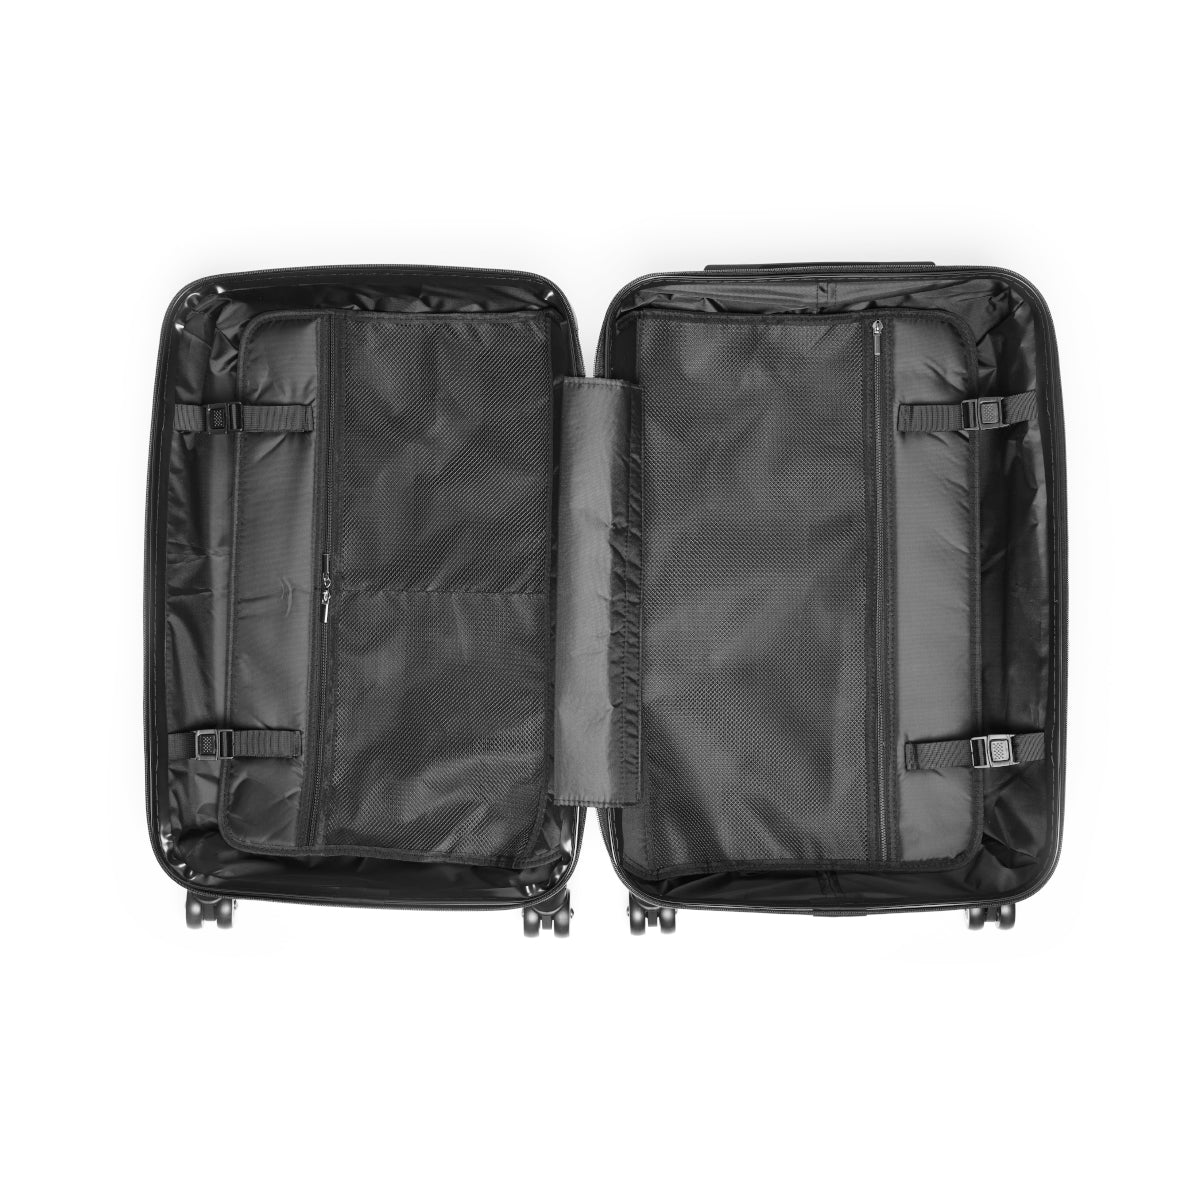 SUITCASE LUGGAGE SET, CARRY-ON FOR WOMEN, DOUBLE WHEELED SPINNER